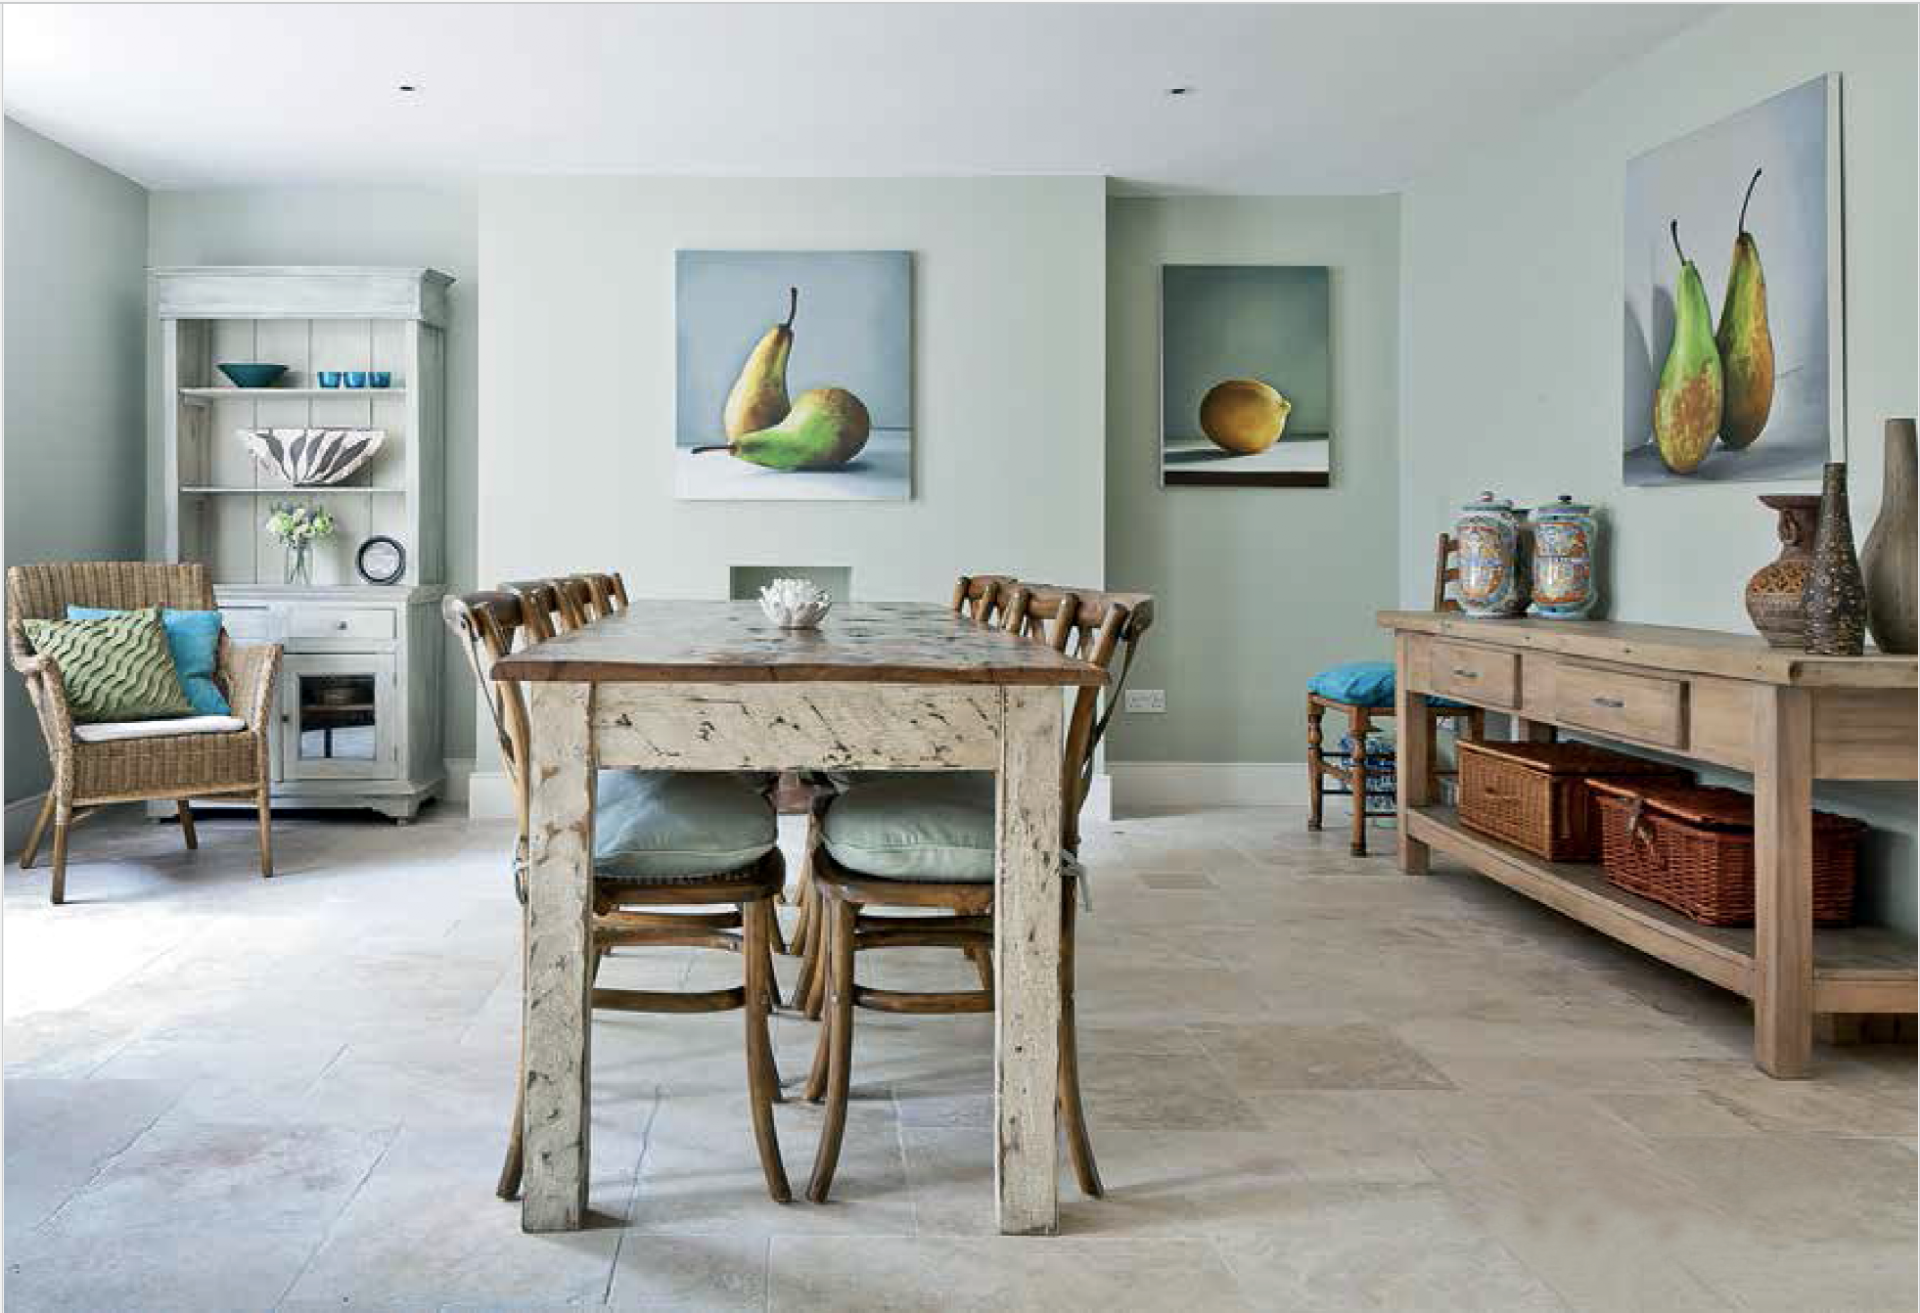 Sarah Wood's paining featured in Beautiful Kitchens